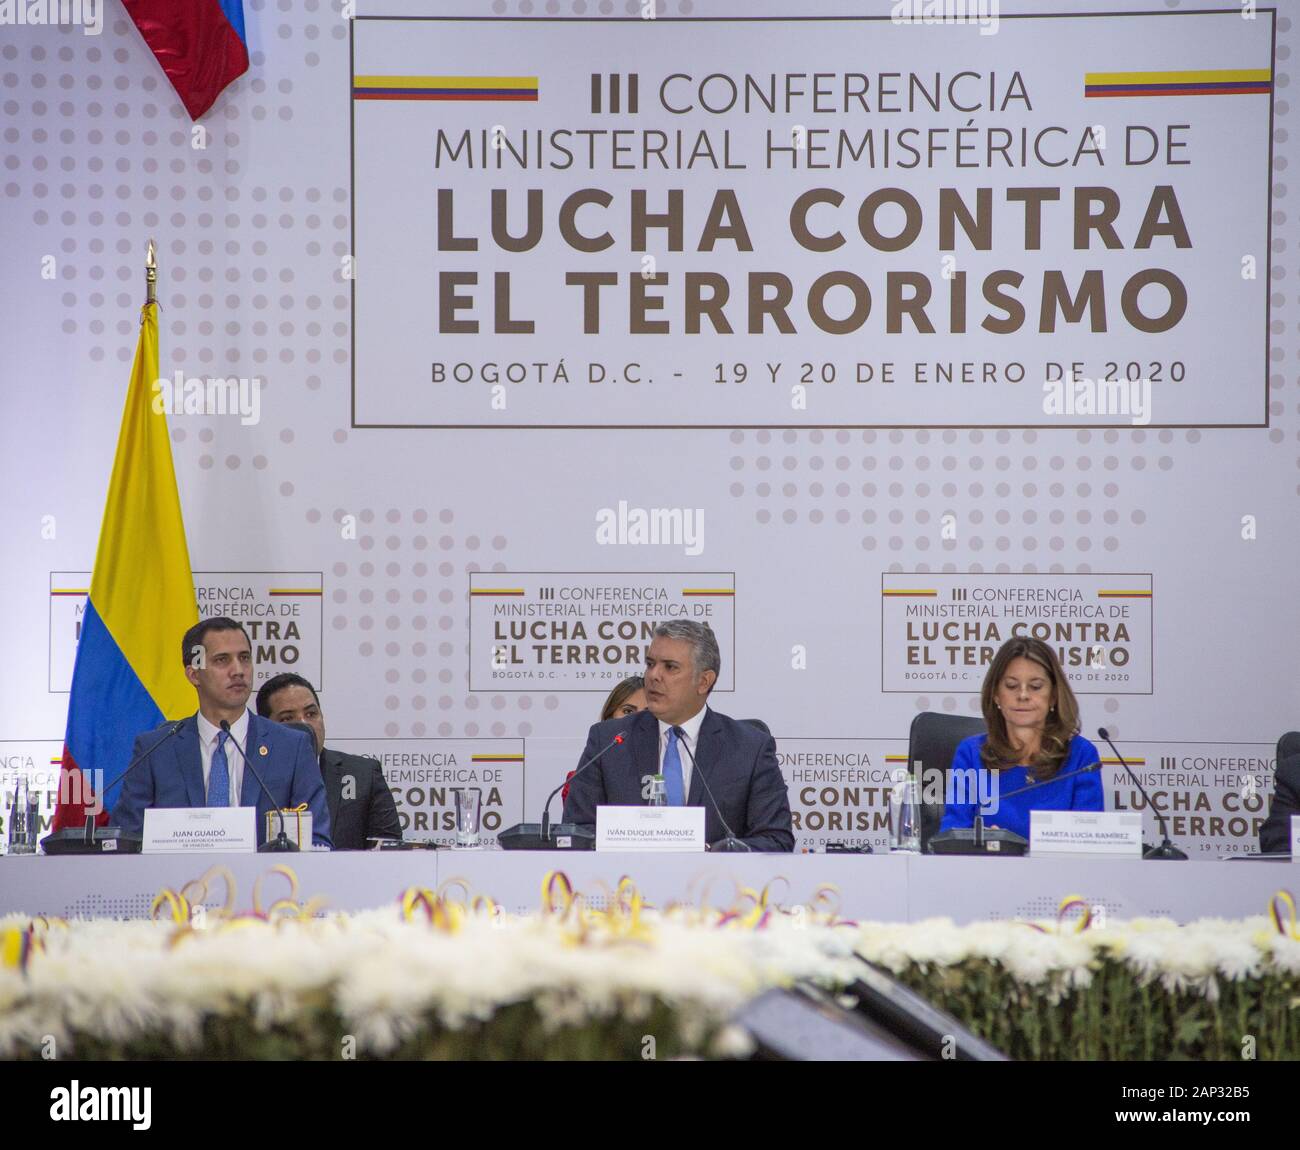 October 10, 2019: Colombia's President Ivan Duque, center of red carpet, US State Secretary Mike Pompeo, third person left of Duque, and Venezuela's opposition leader Juan Guaido, attending a ceremony marking one year since a car bomb attack at the police academy in Bogota, Colombia, during the inauguration of a regional anti-terrorism summit. Credit: Daniel Garzon Herazo/ZUMA Wire/Alamy Live News Stock Photo